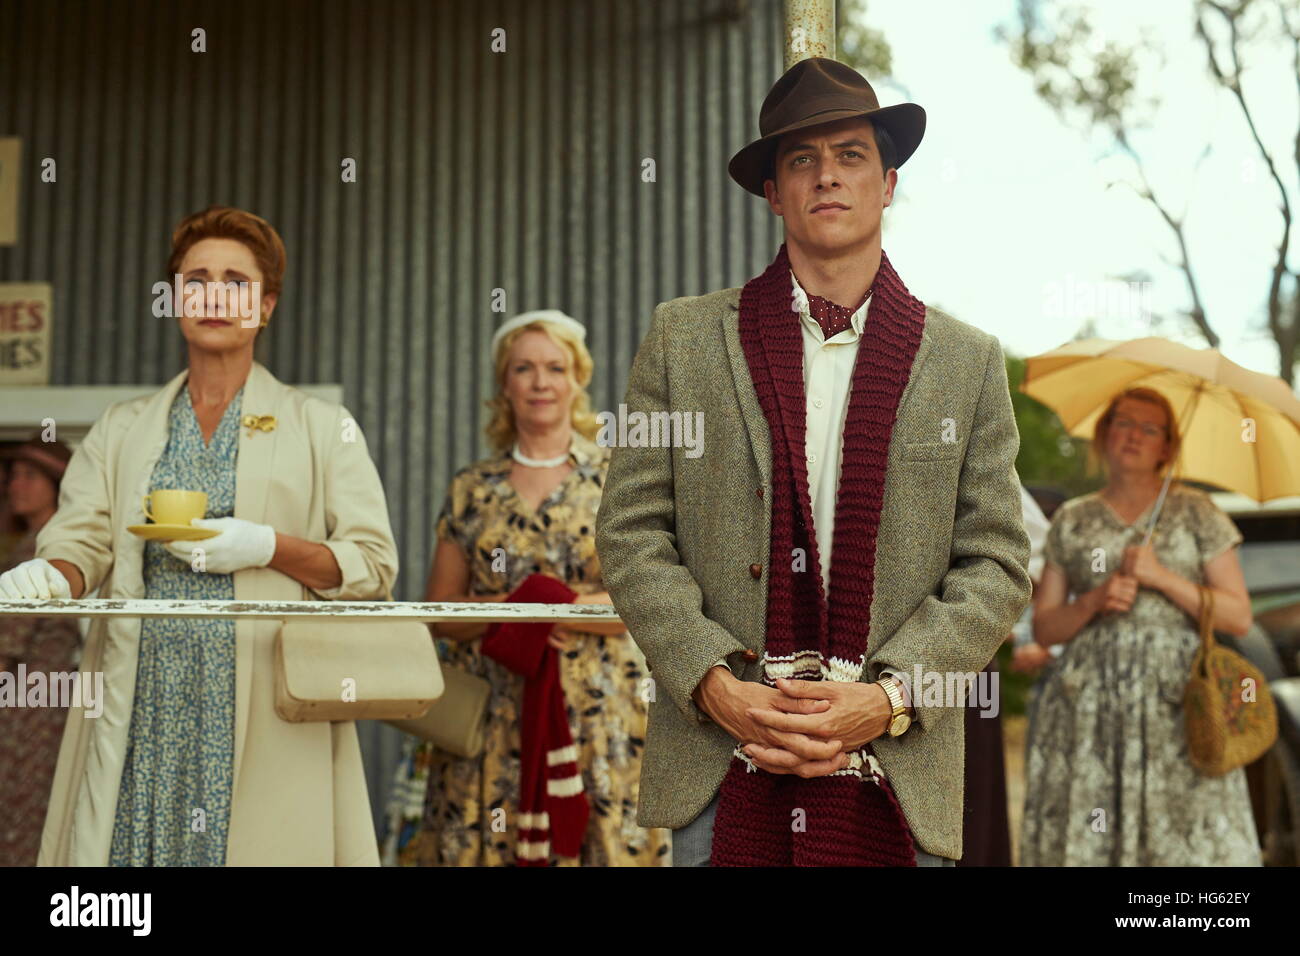 RELEASE DATE: December 16, 2016 TITLE: The Dressmaker STUDIO: Universal Pictures DIRECTOR: Jocelyn Moorhouse PLOT: A glamorous woman returns to her small town in rural Australia. With her sewing machine and haute couture style, she transforms the women and exacts sweet revenge on those who did her wrong PICTURED: James Mackay (Credit: © Universal Pictures/Entertainment Pictures) Stock Photo